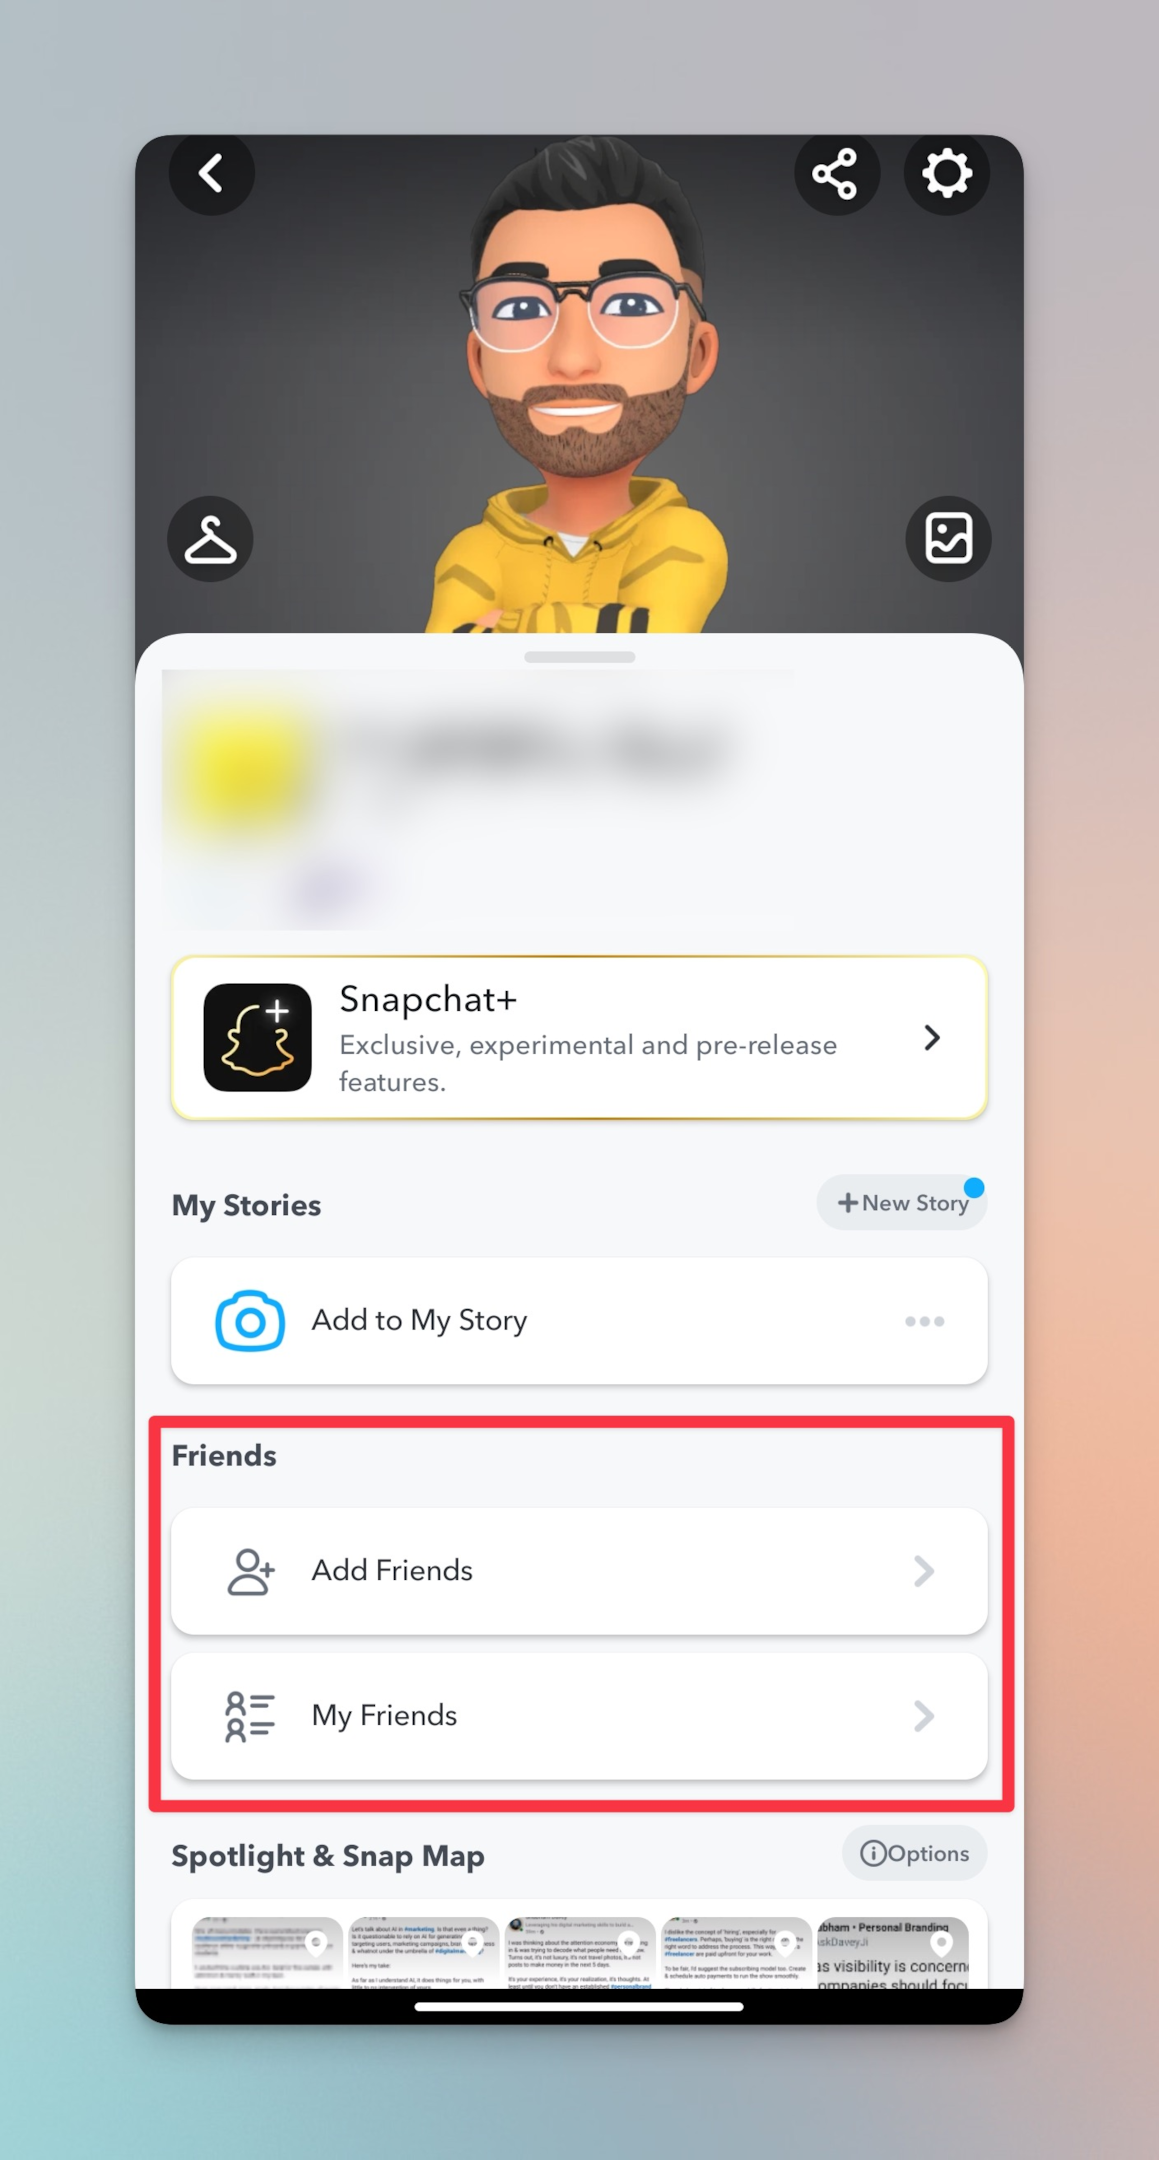 Remote.tools highlights the Friends section of a snapchat profile to see your friends list on Snapchat